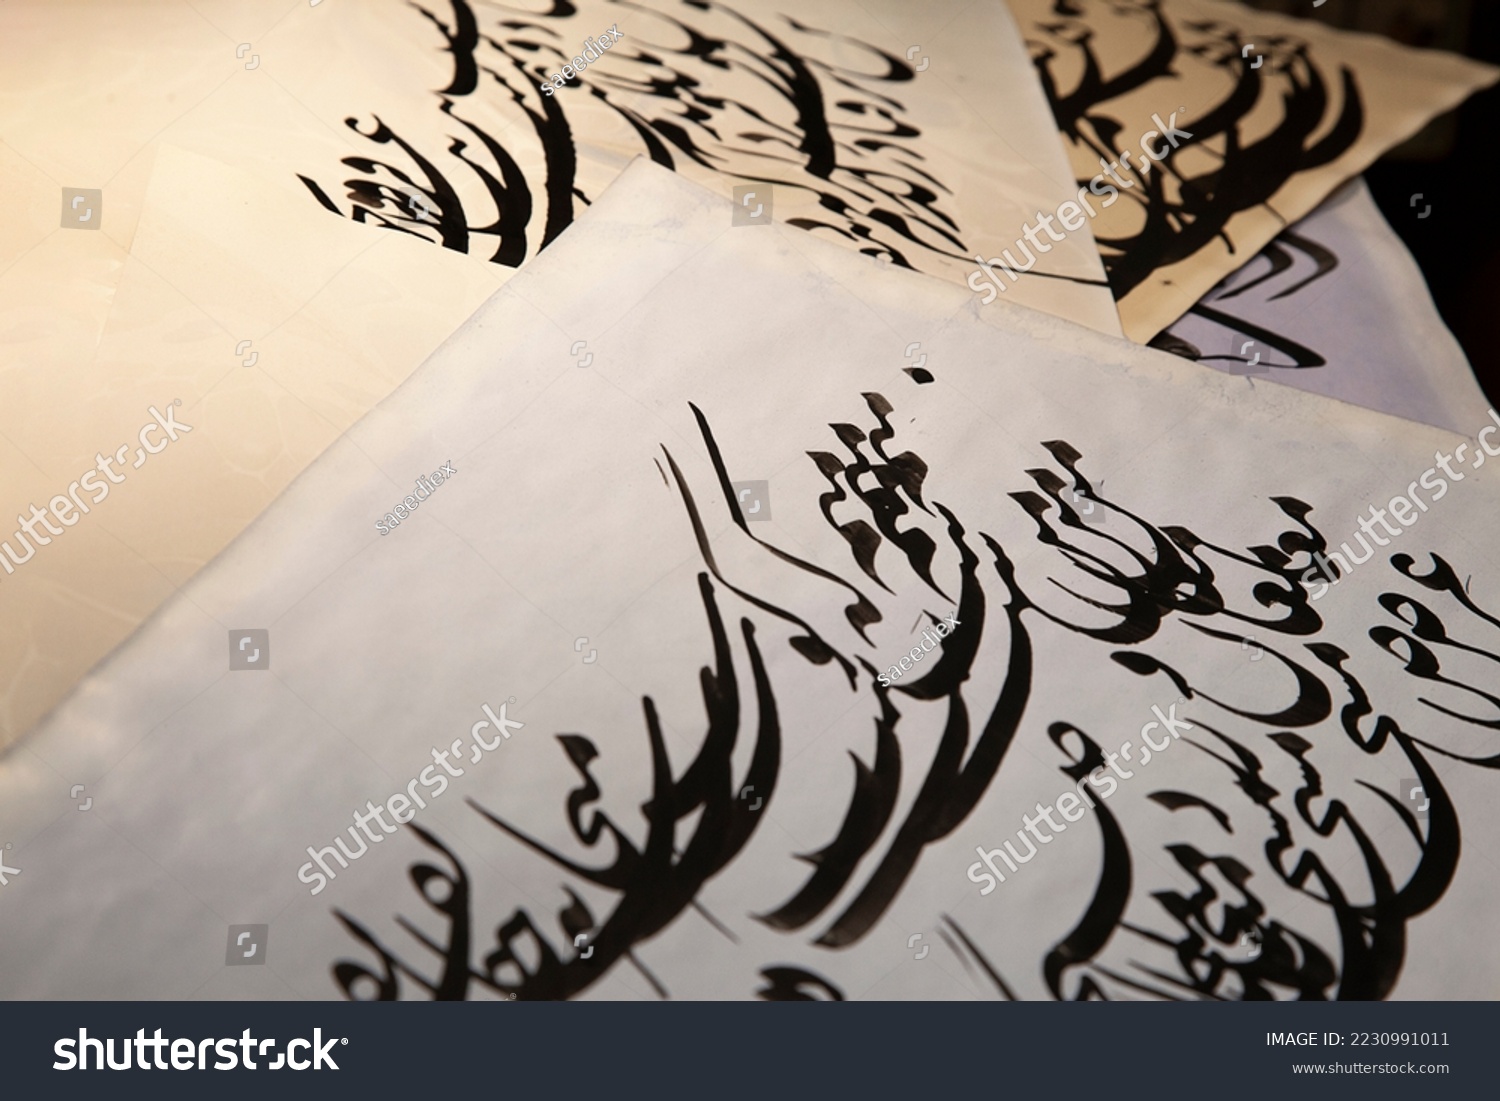 Persian calligraphy paper. A background of Persian calligraphy works. The papers are placed together. Interwoven writings. A writing of the repetition of the words "me, me, pub, pub, morning, morning" #2230991011